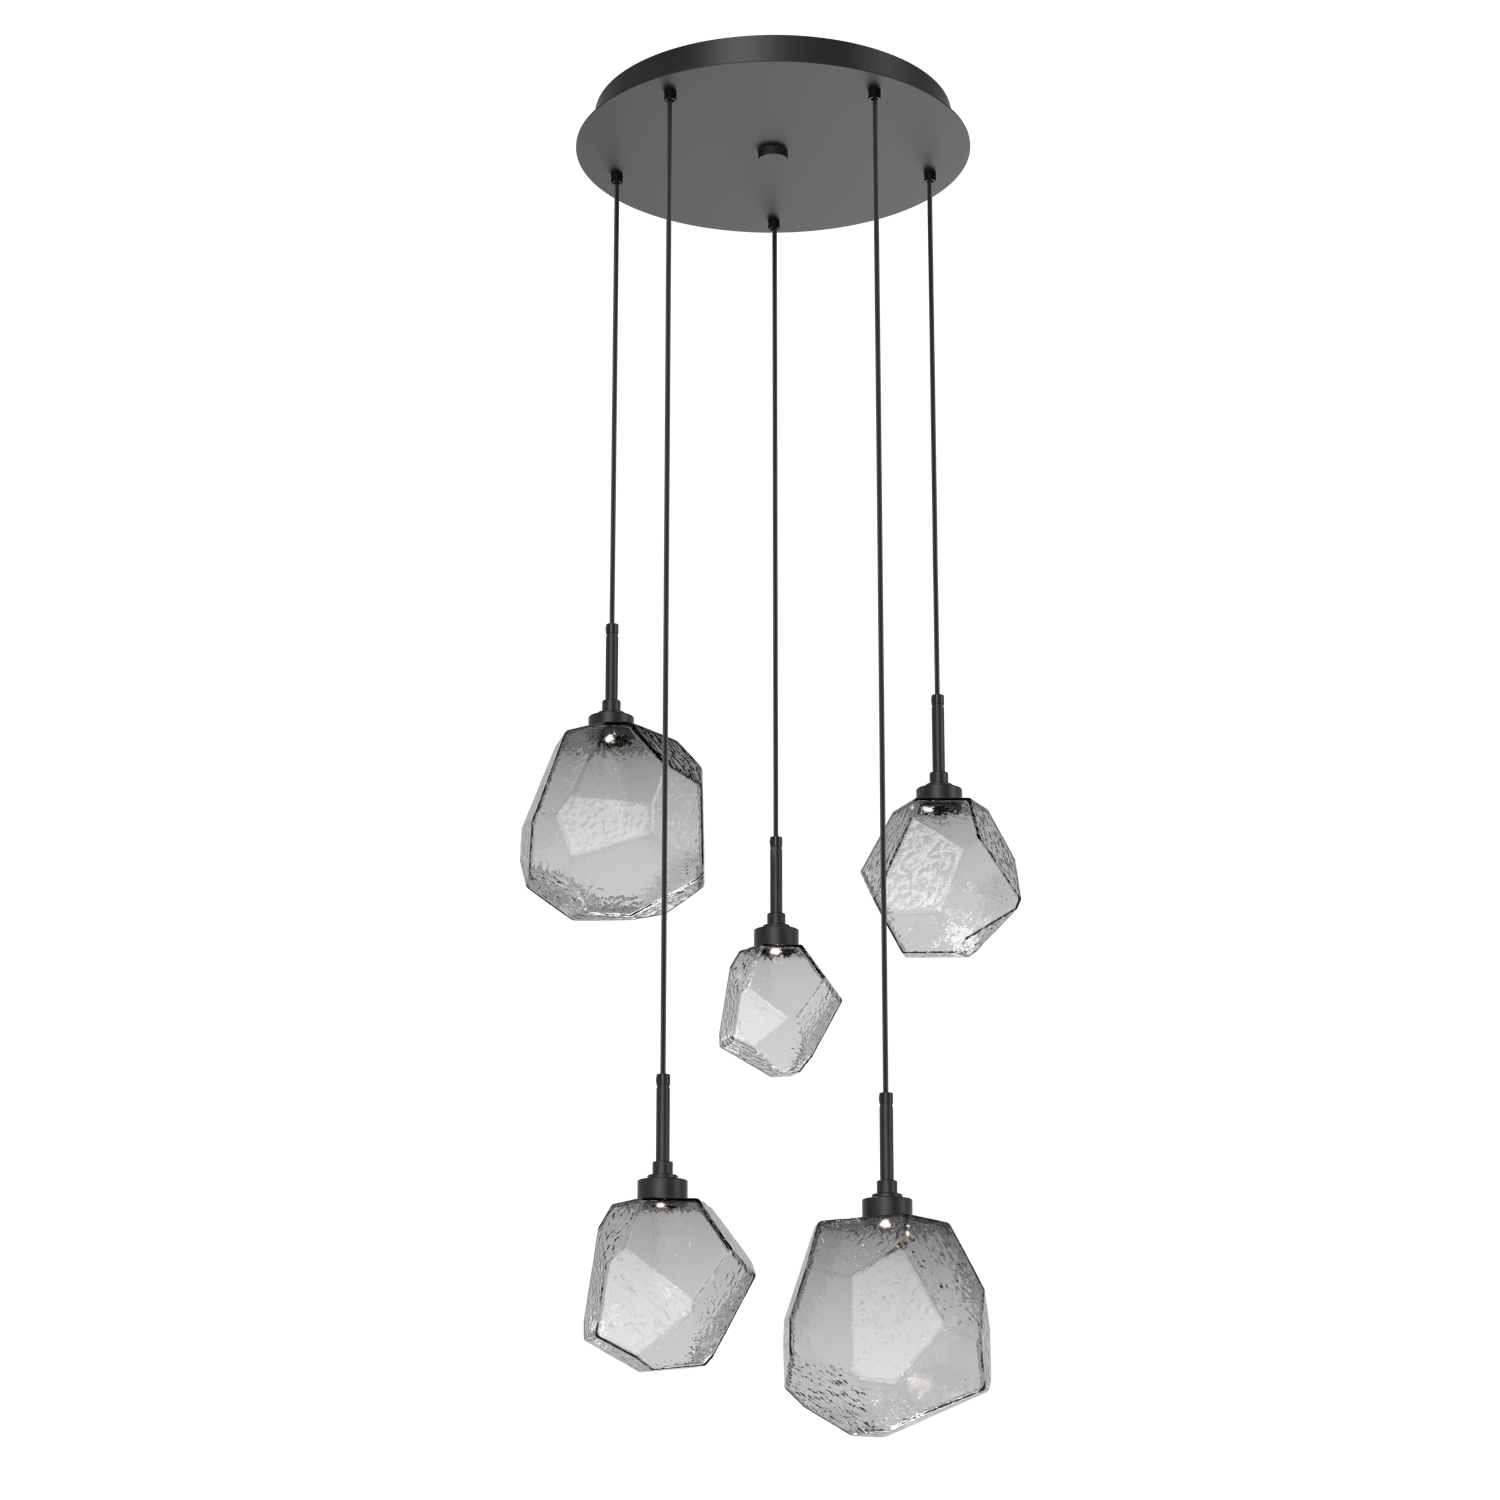 CHB0039-05-MB-S-Hammerton-Studio-Gem-5-light-round-pendant-chandelier-with-matte-black-finish-and-smoke-blown-glass-shades-and-LED-lamping